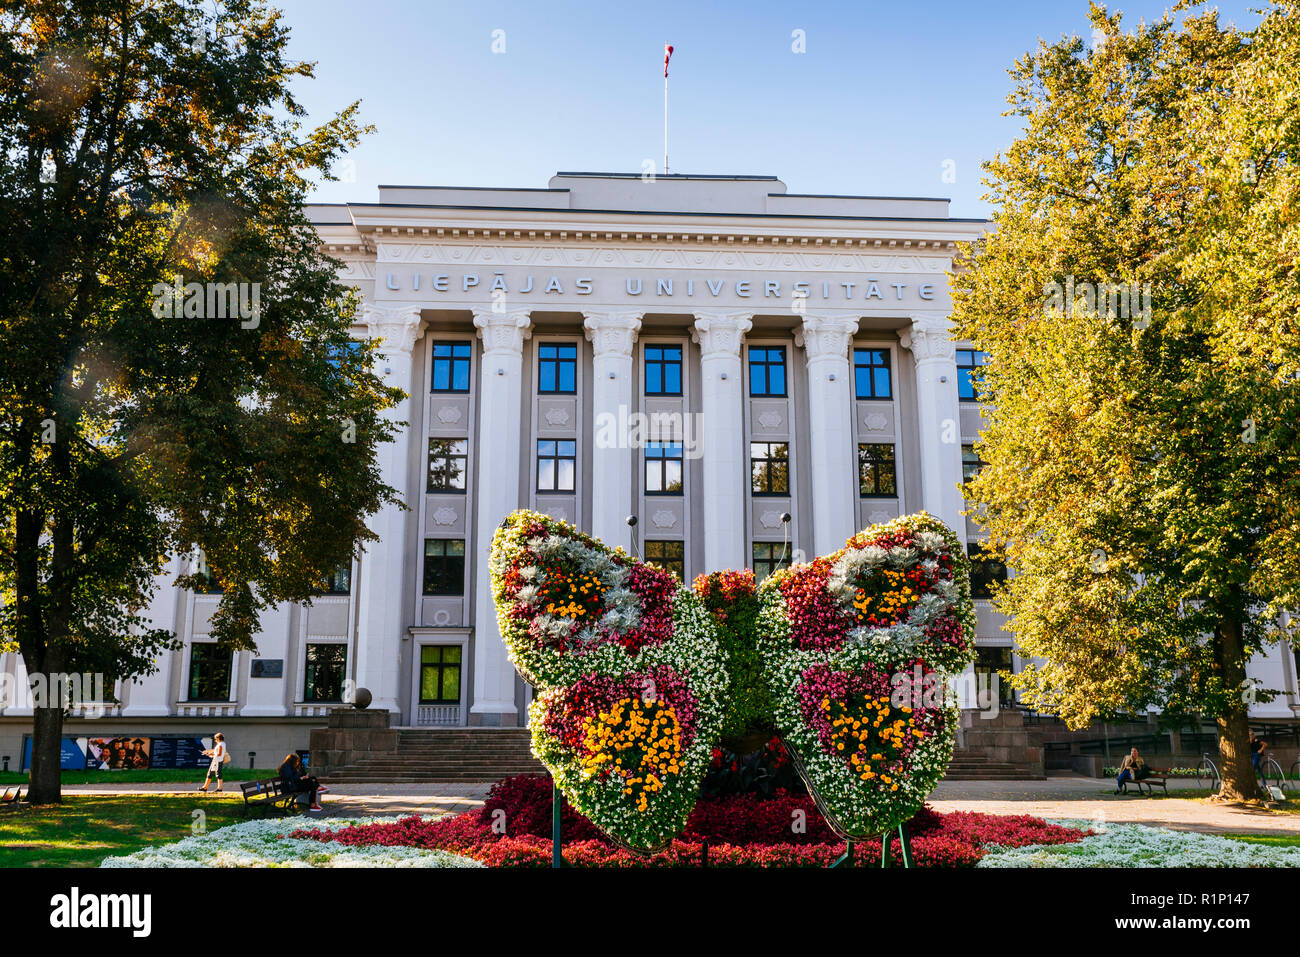 Butterfly of flowers in front of the University building.Liepāja - Liepaja, Kurzeme Region, Latvia, Baltic states, Europe Stock Photo